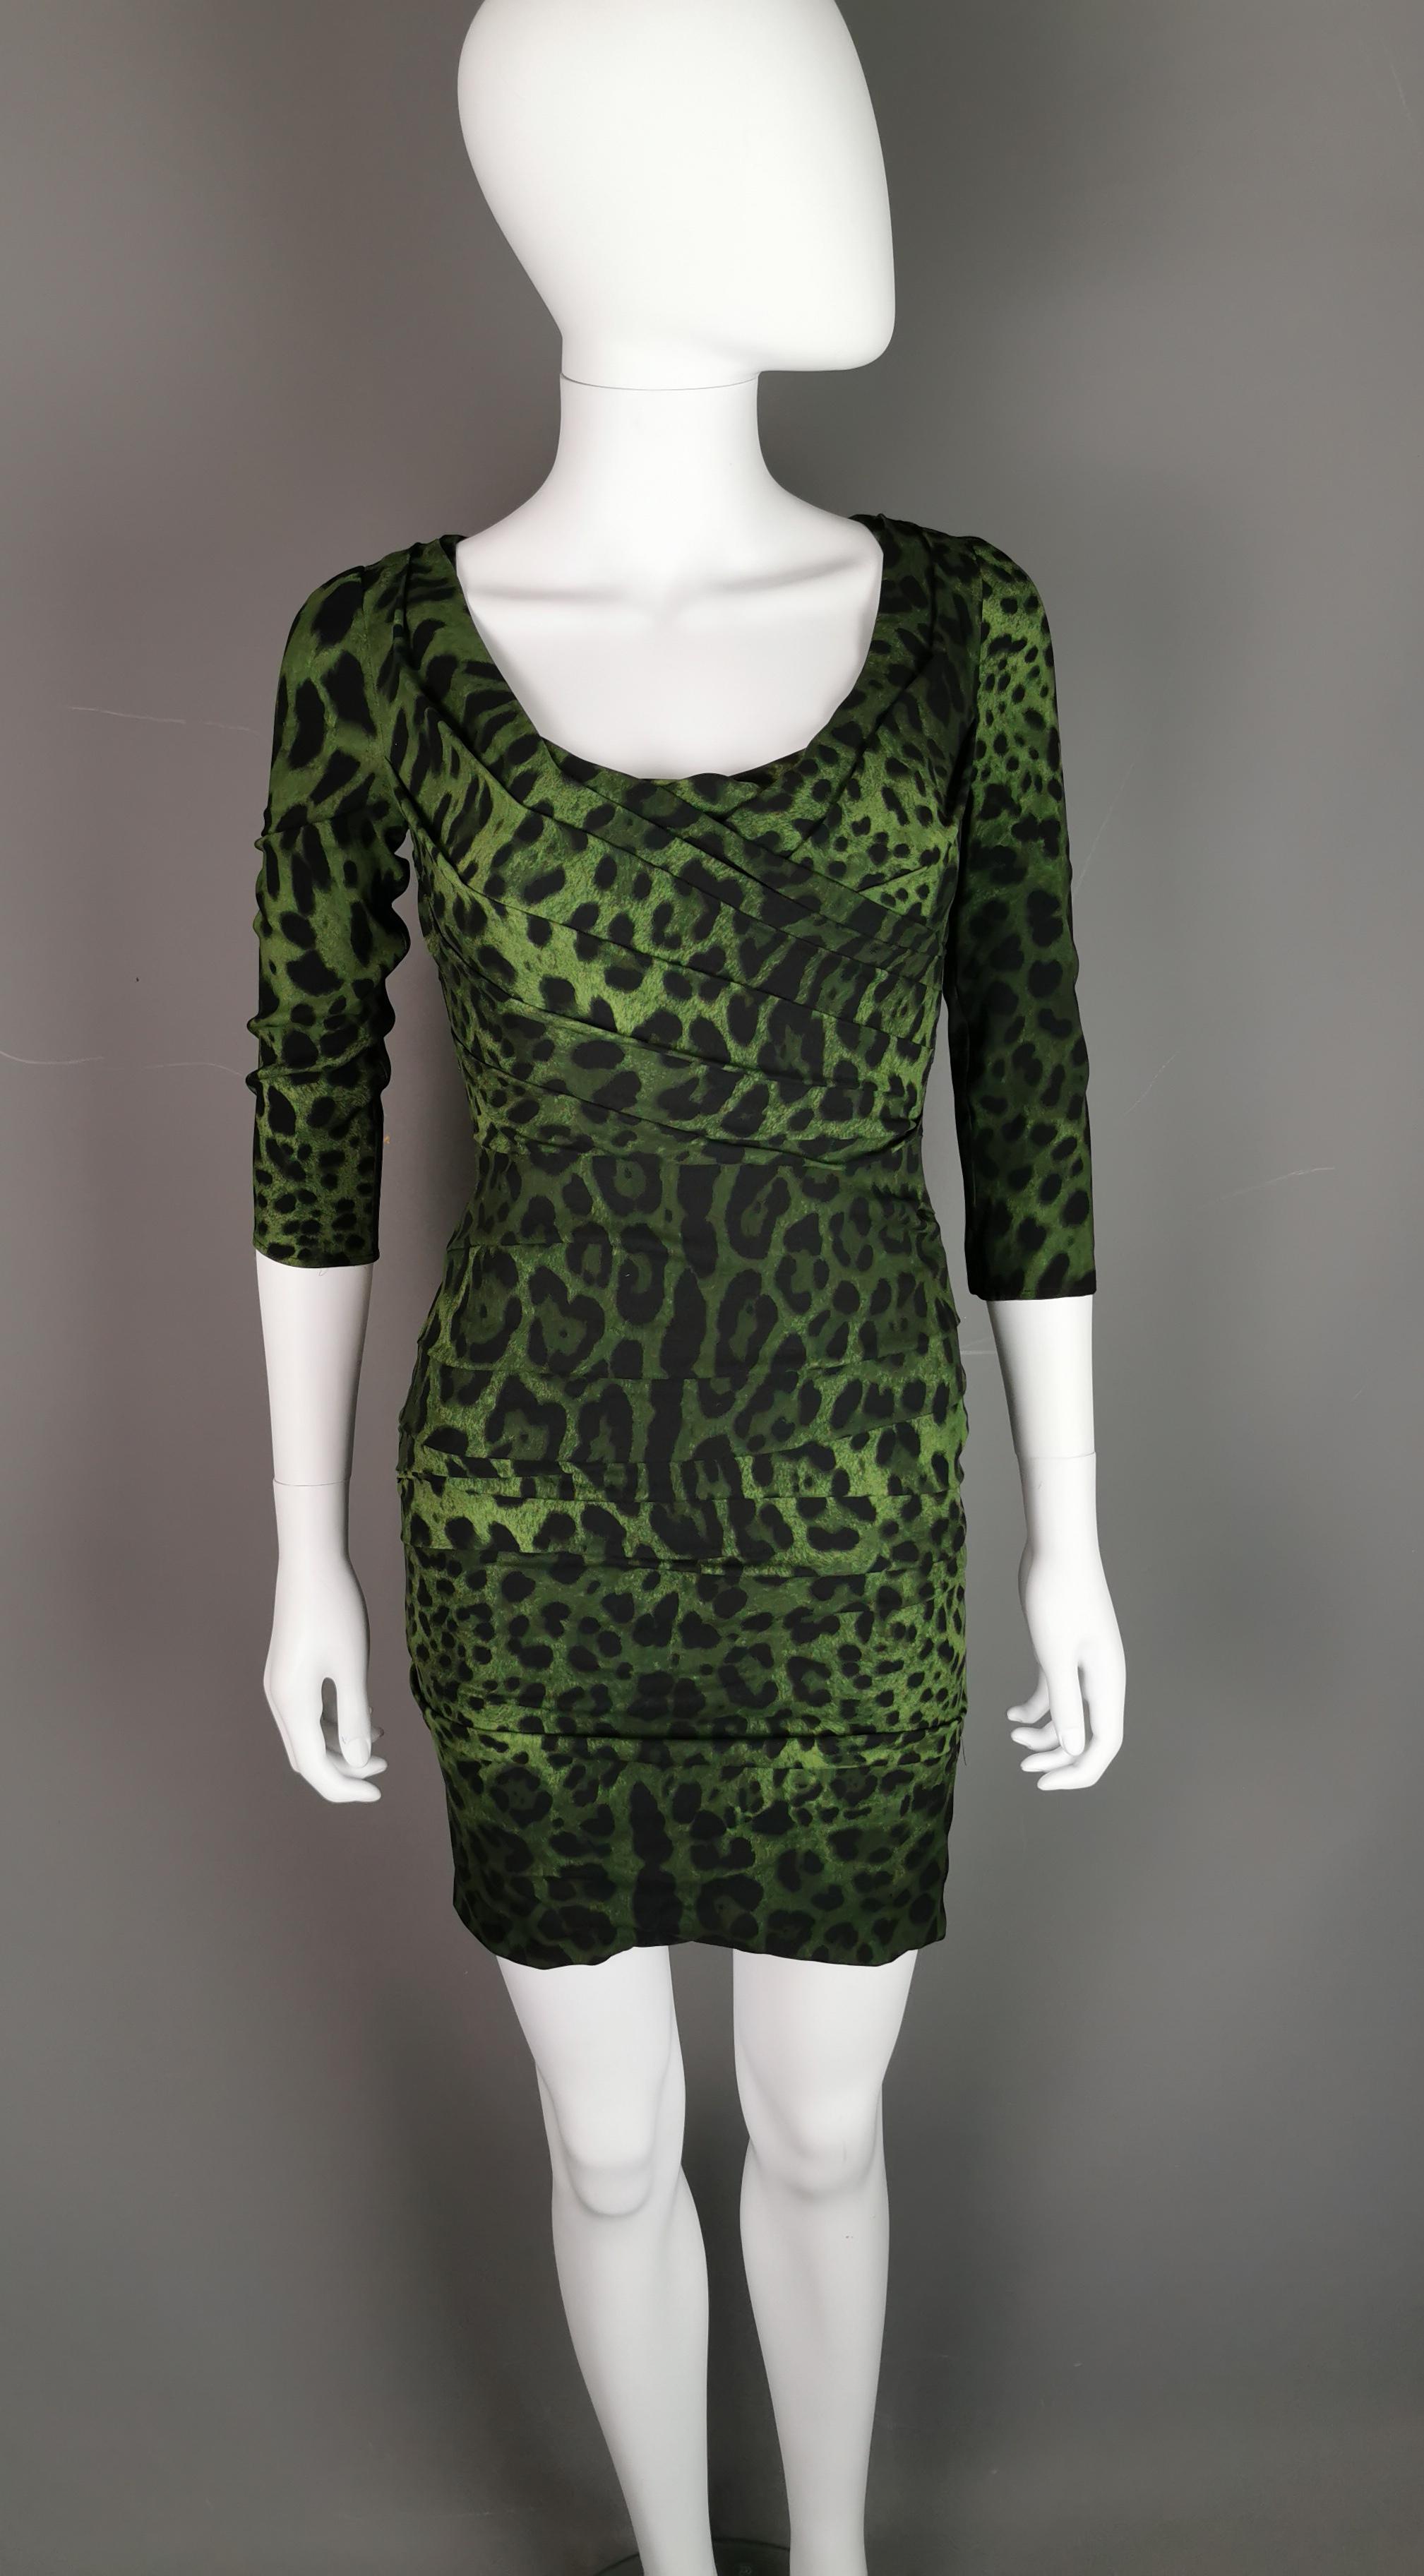 A gorgeous Dolce and Gabbana green and black leopard print bodycon mini dress.

The dress has low sloping shoulders and ruched detailing, the neckline is fairly low and rounded accentuated by the ruched design.

It has a slim figure hugging fit and